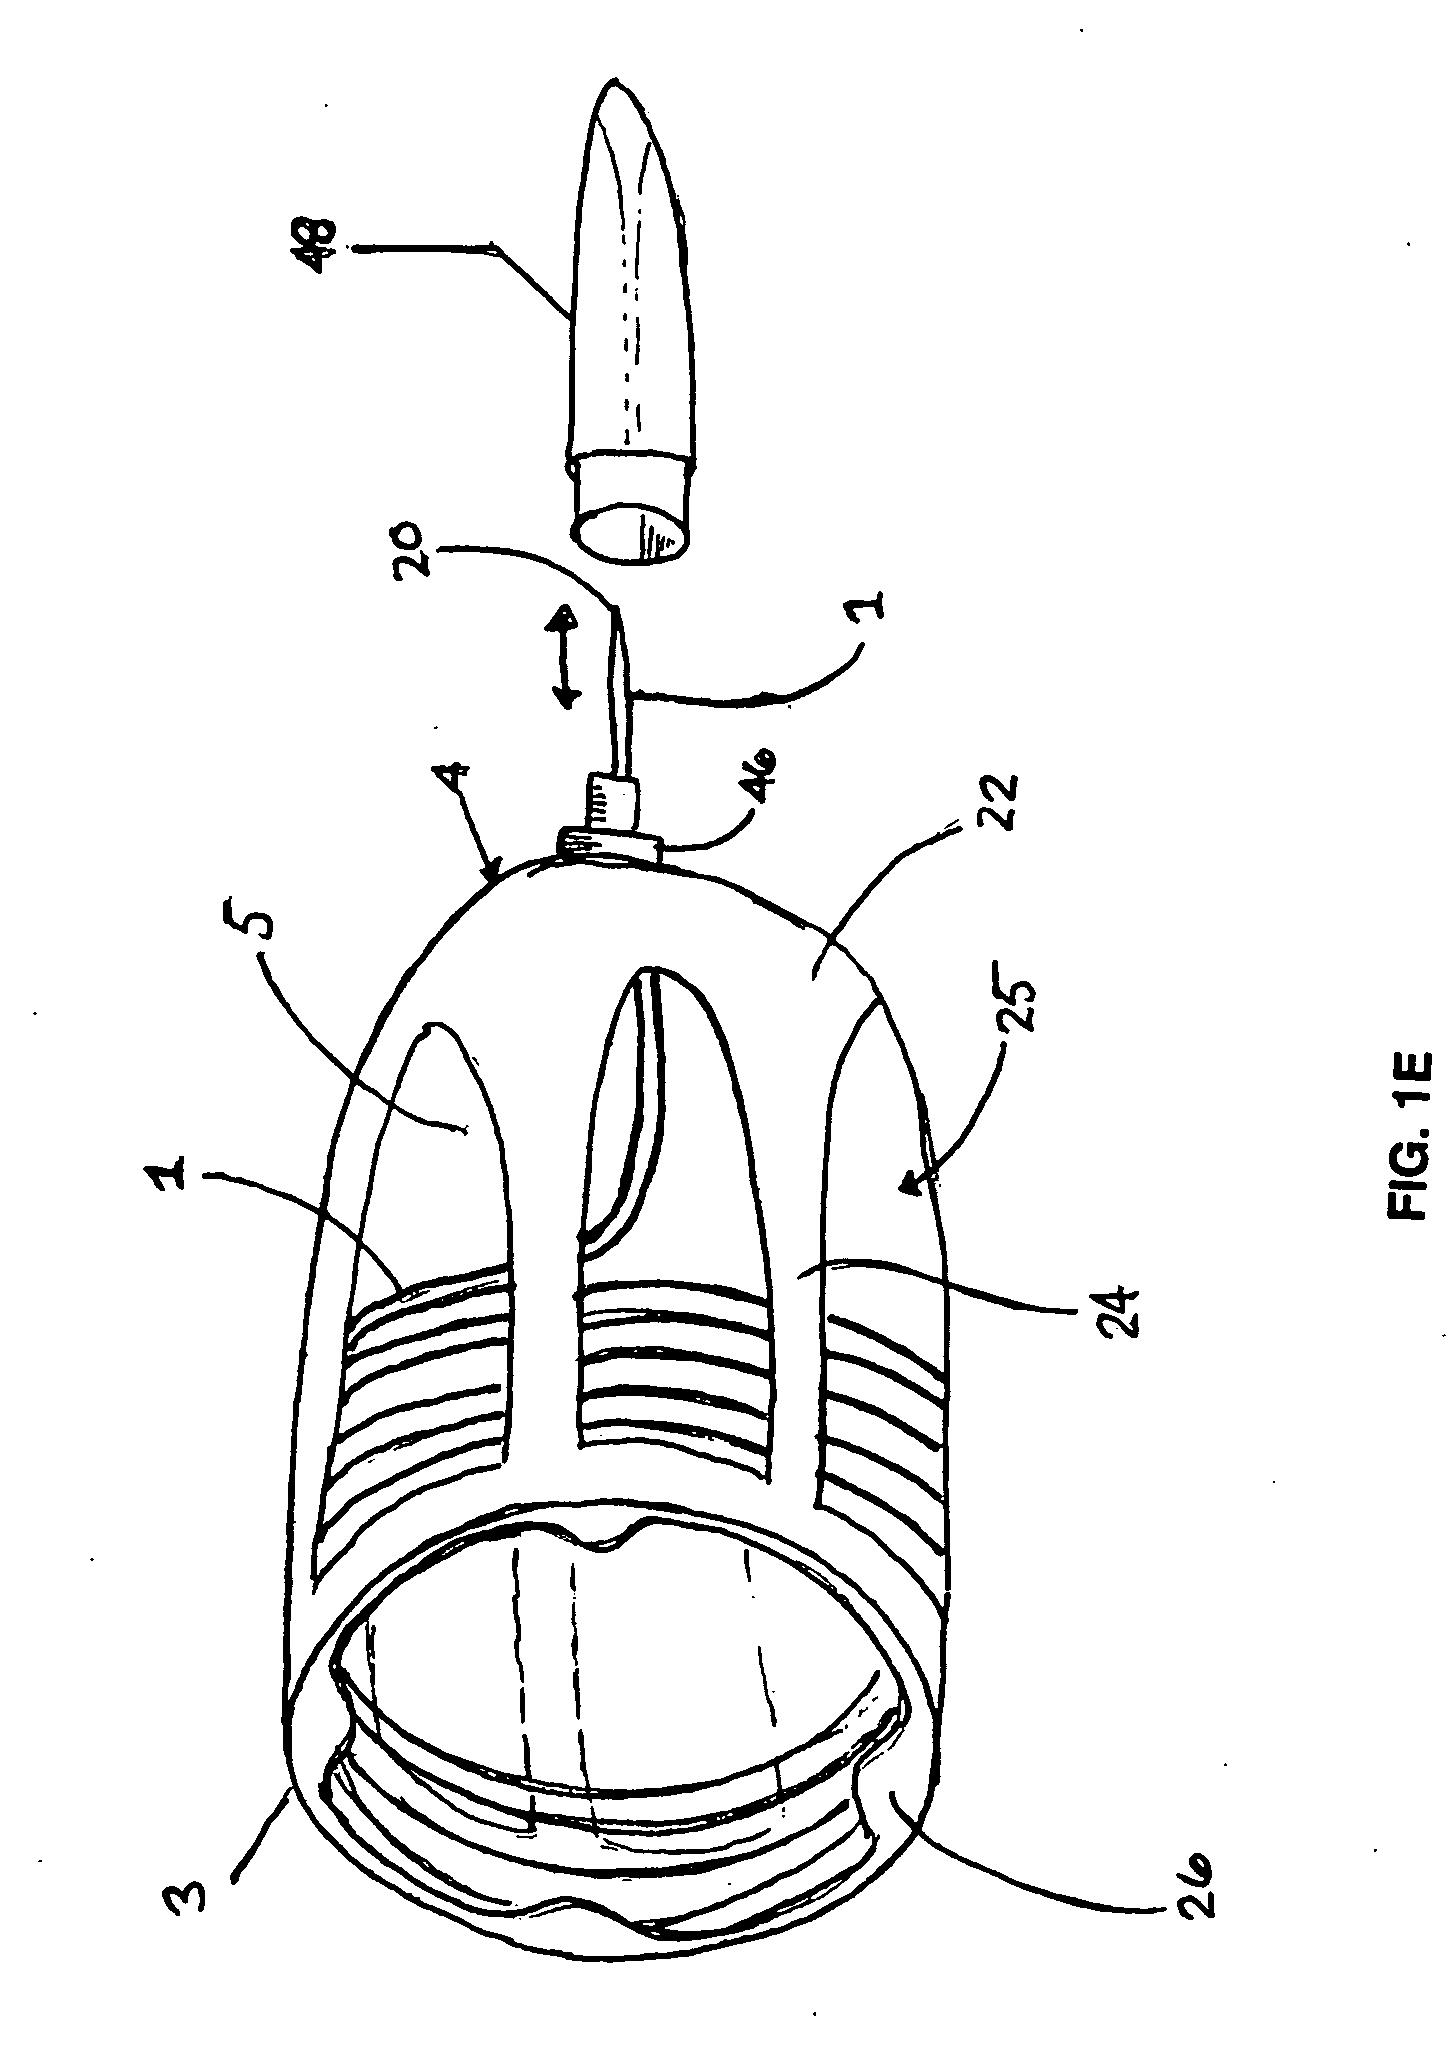 Epidural catheter system and methods of use